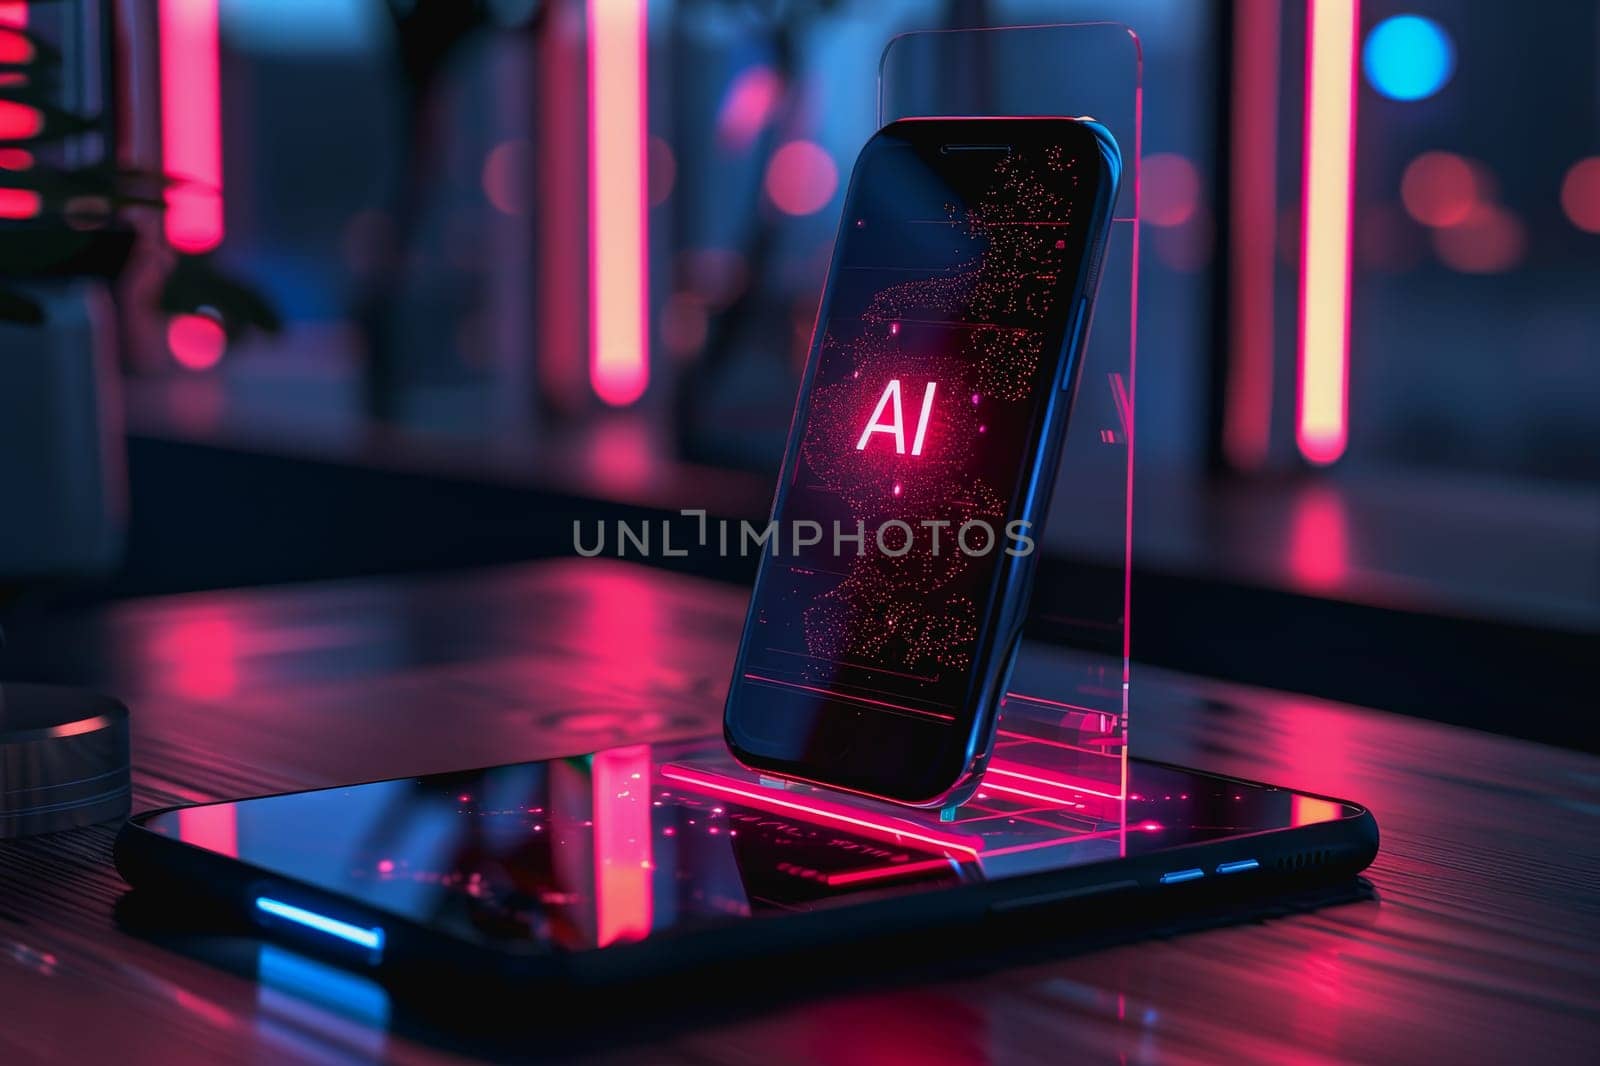 ransparent smartphone display on with AI text to the screen for futuristic technology concepts by Manastrong